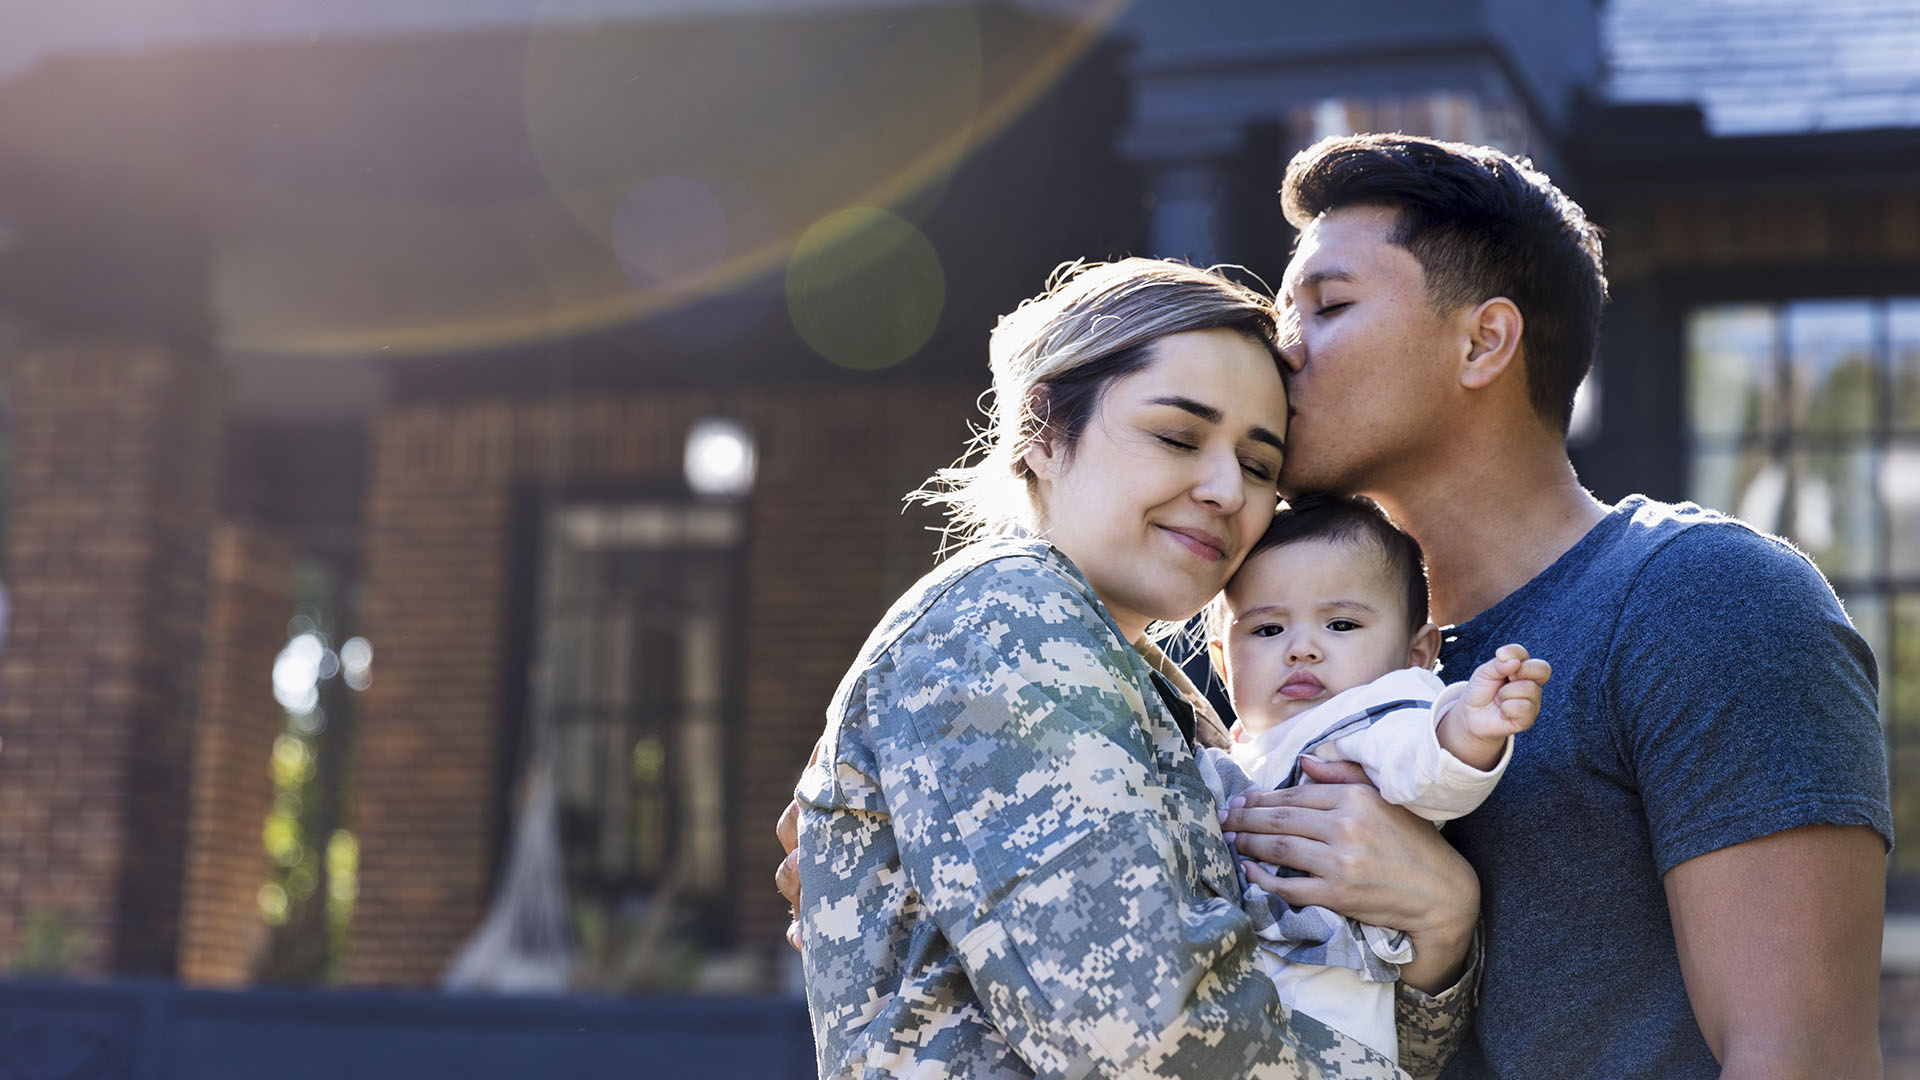 Alight employment for military veterans and their family